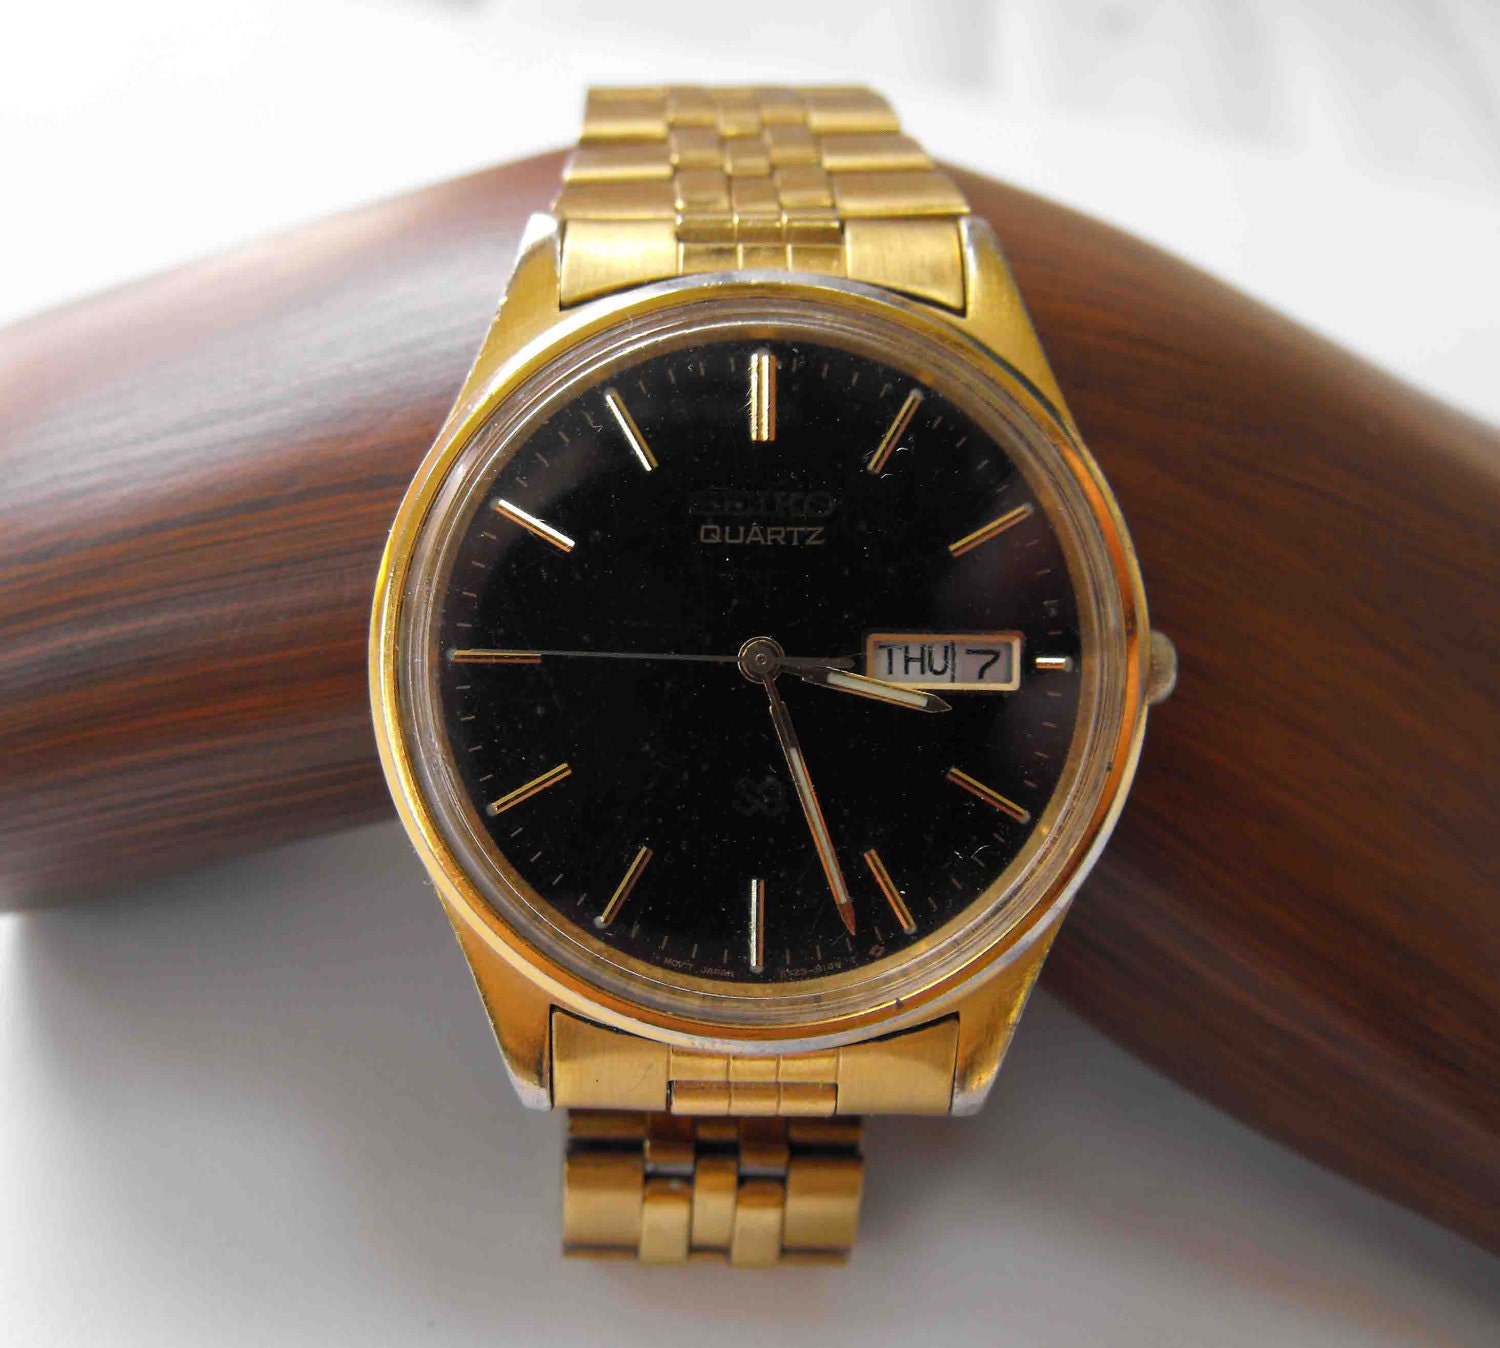 Vintage Watch Men's Seiko Battery Gold Plated by Nonnie60 on Etsy